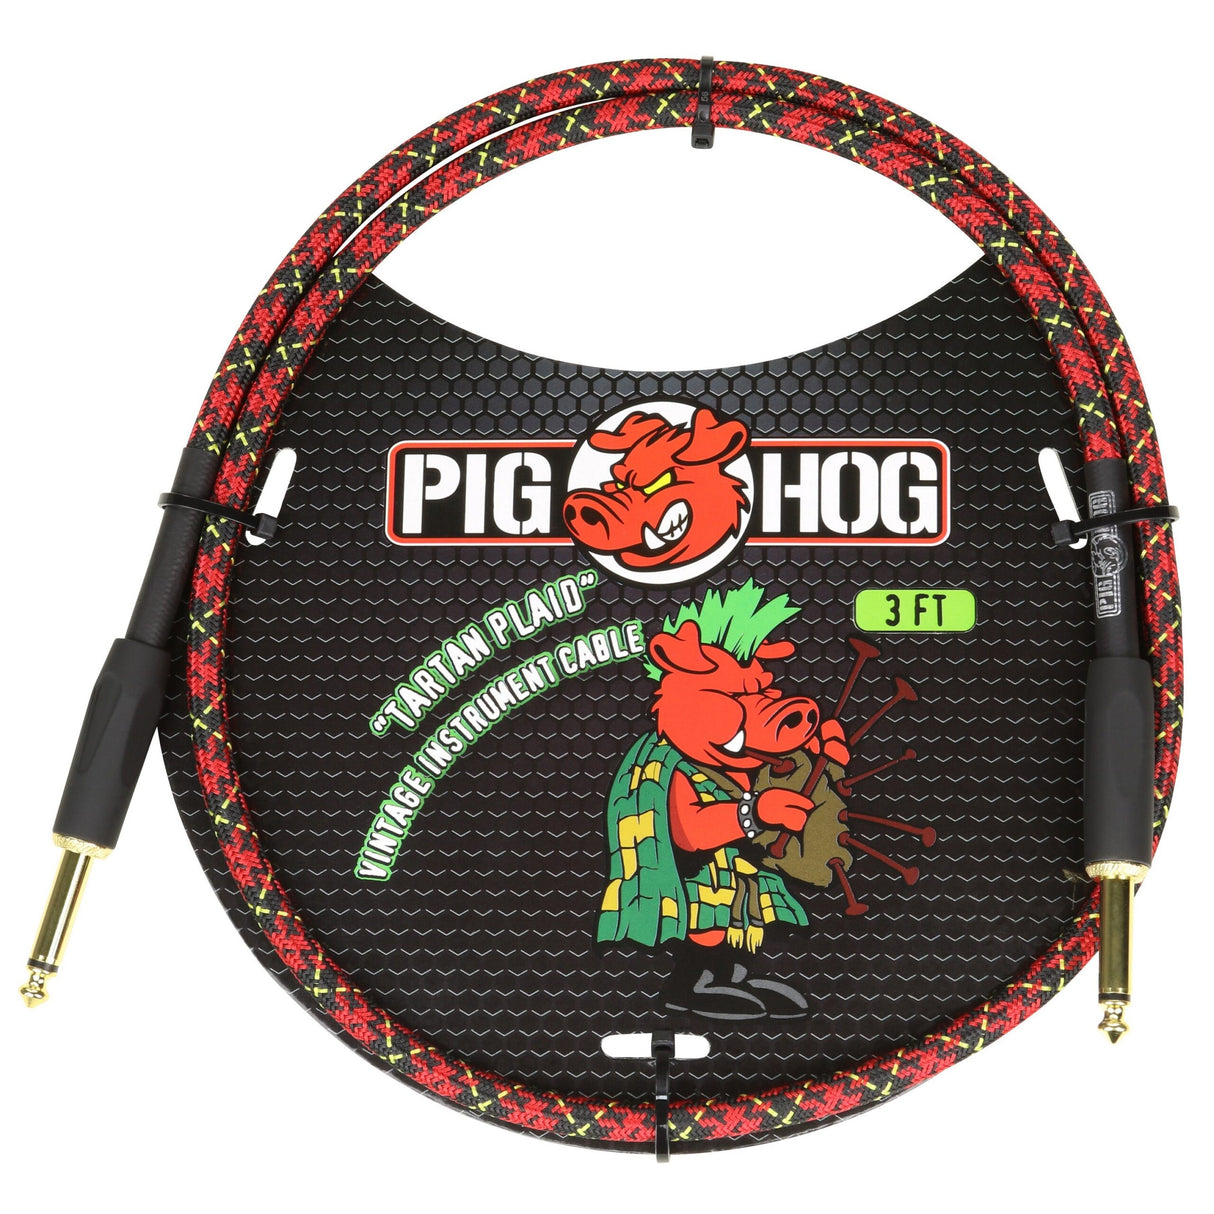 Pig Hog PCH3PL "Tartan Plaid" 3ft Right Angled Patch Cables